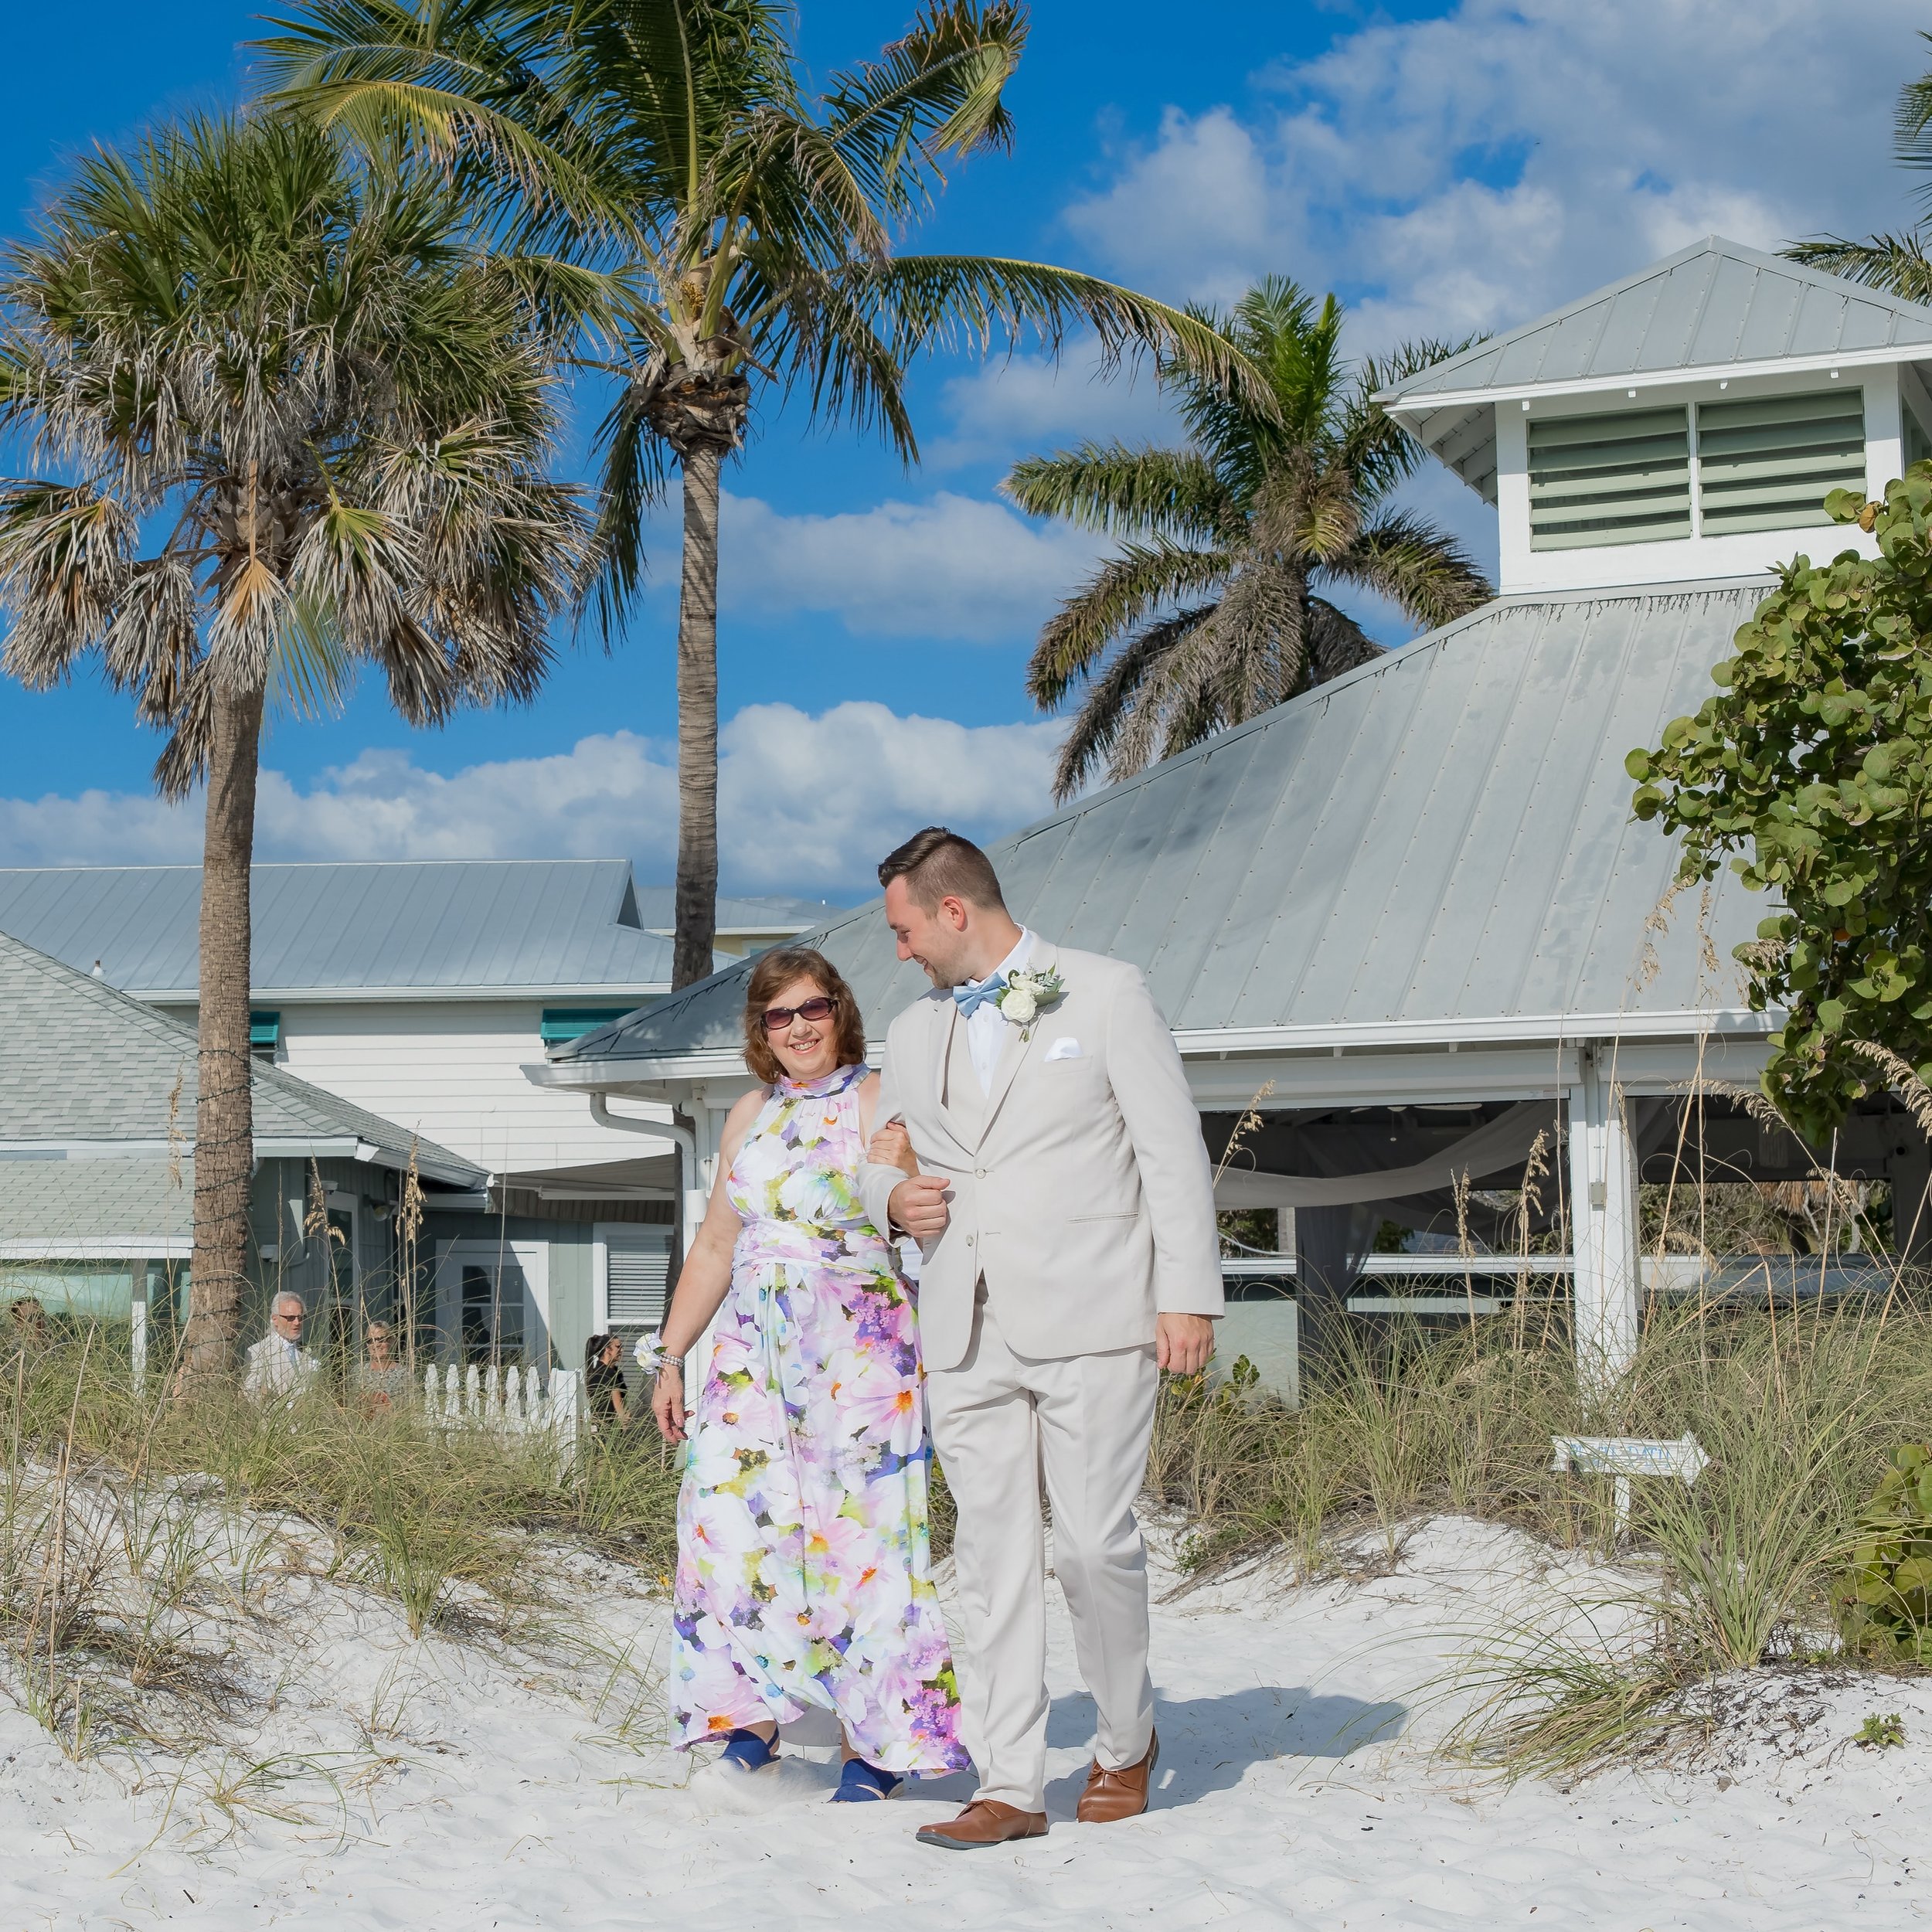 Here&rsquo;s to the amazing moms who bring sunshine into our lives and make life a beautiful journey. Happy Mother&rsquo;s Day! 💐

📸 Photo credit goes to @sandhillphotography 

#annamariaisland #floridawedding #centralfloridaweddingvendors #florida